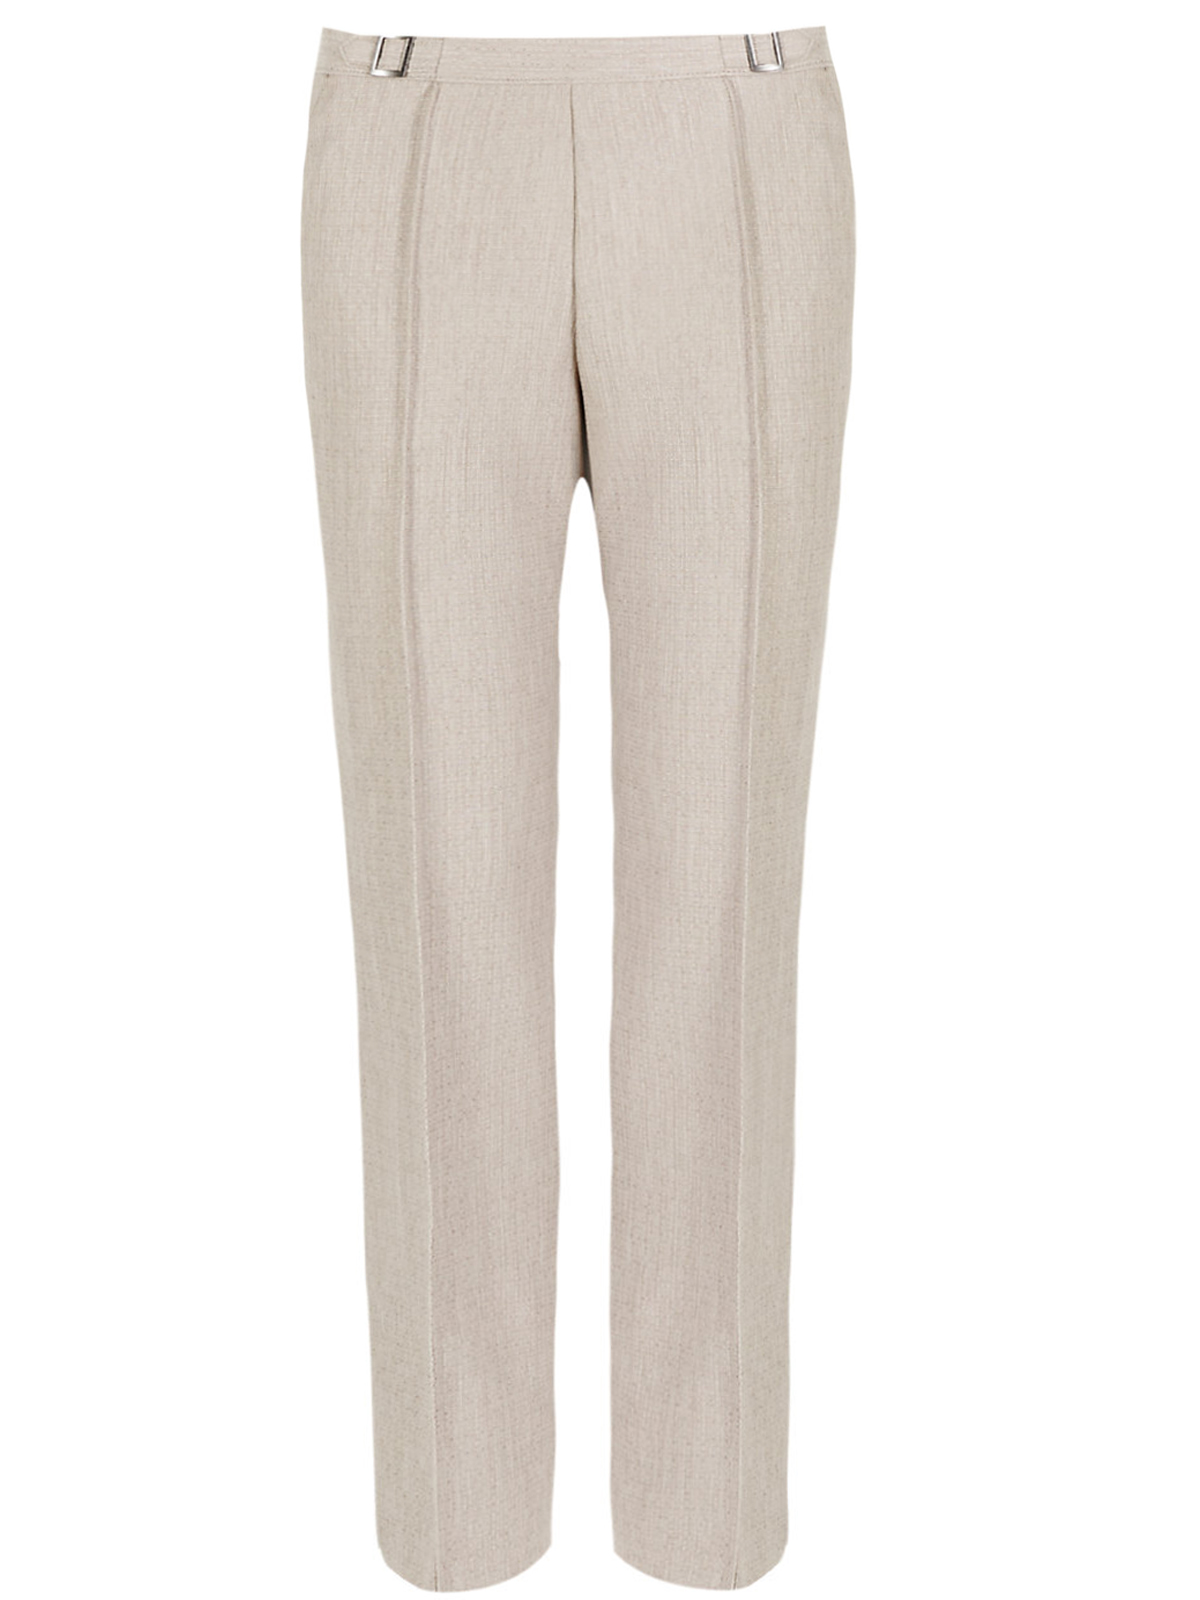 Marks and Spencer - - M&5 MINK Straight Leg Pull On Trousers - Size 12 ...